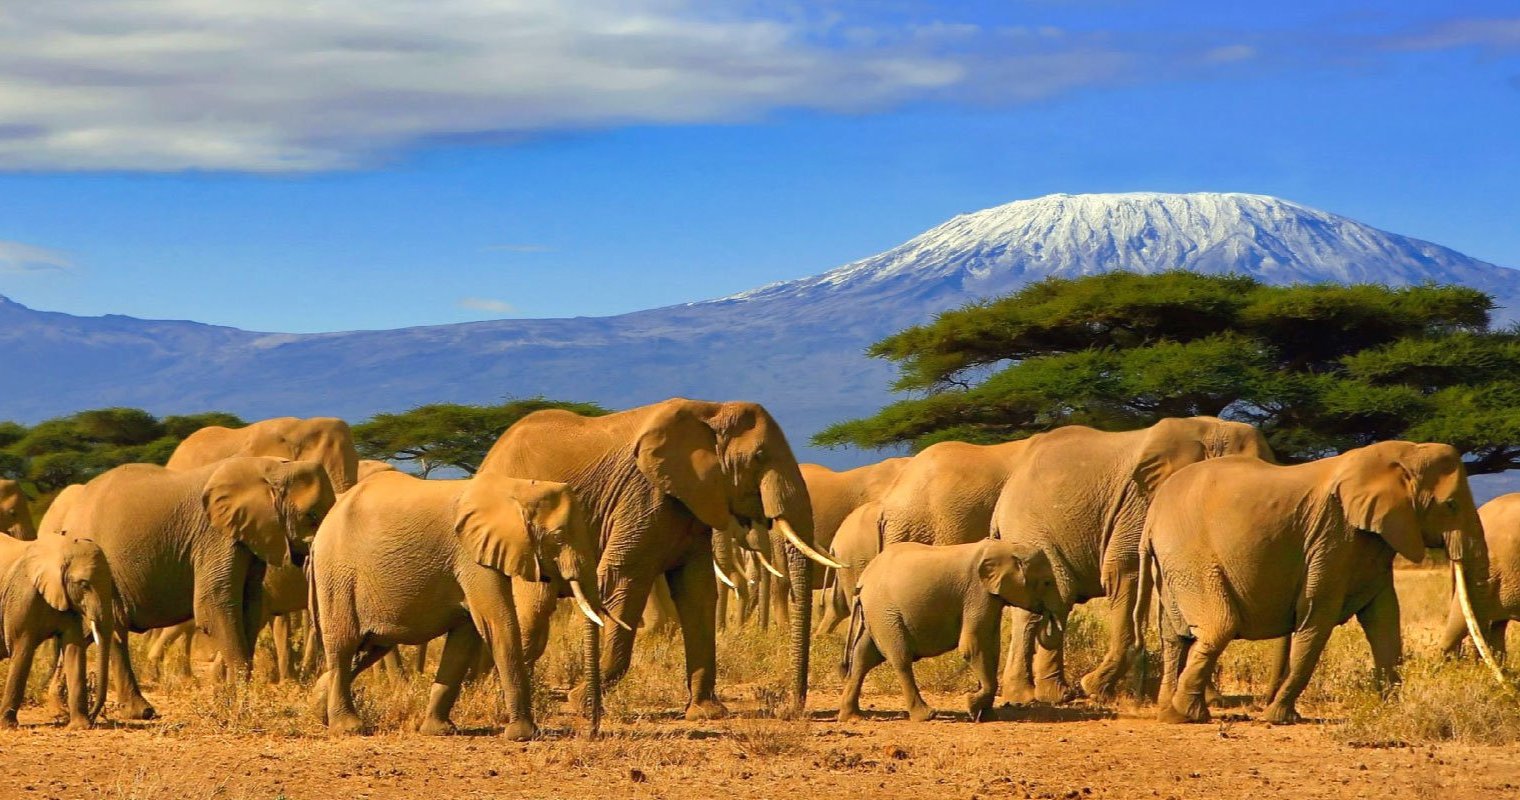 Elephants with Mount Kilimanjaro in the background